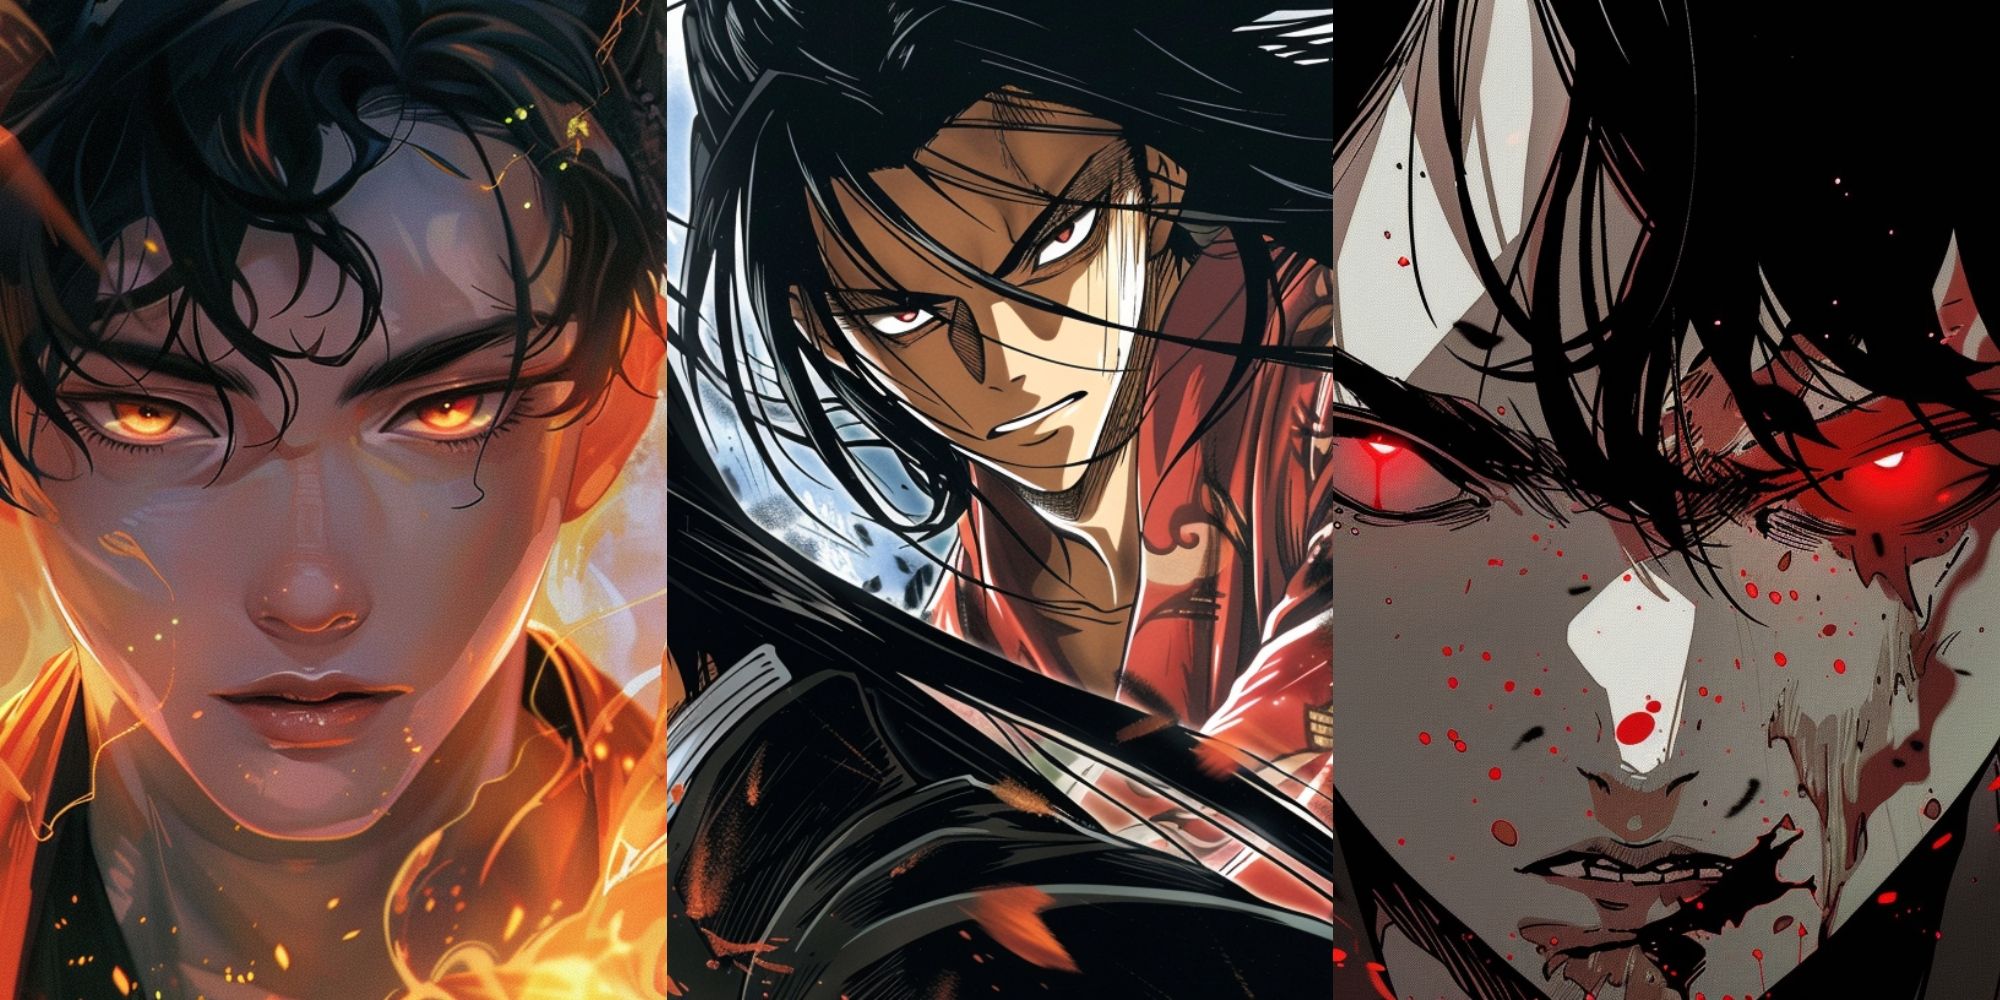 Three characters in a slide motion depticing three unique artist style of Manhwa, with the first one having fire power, the second wone being a martial artist in a staredown, and the third one being a bloody beat up mess maintaining eye contact.